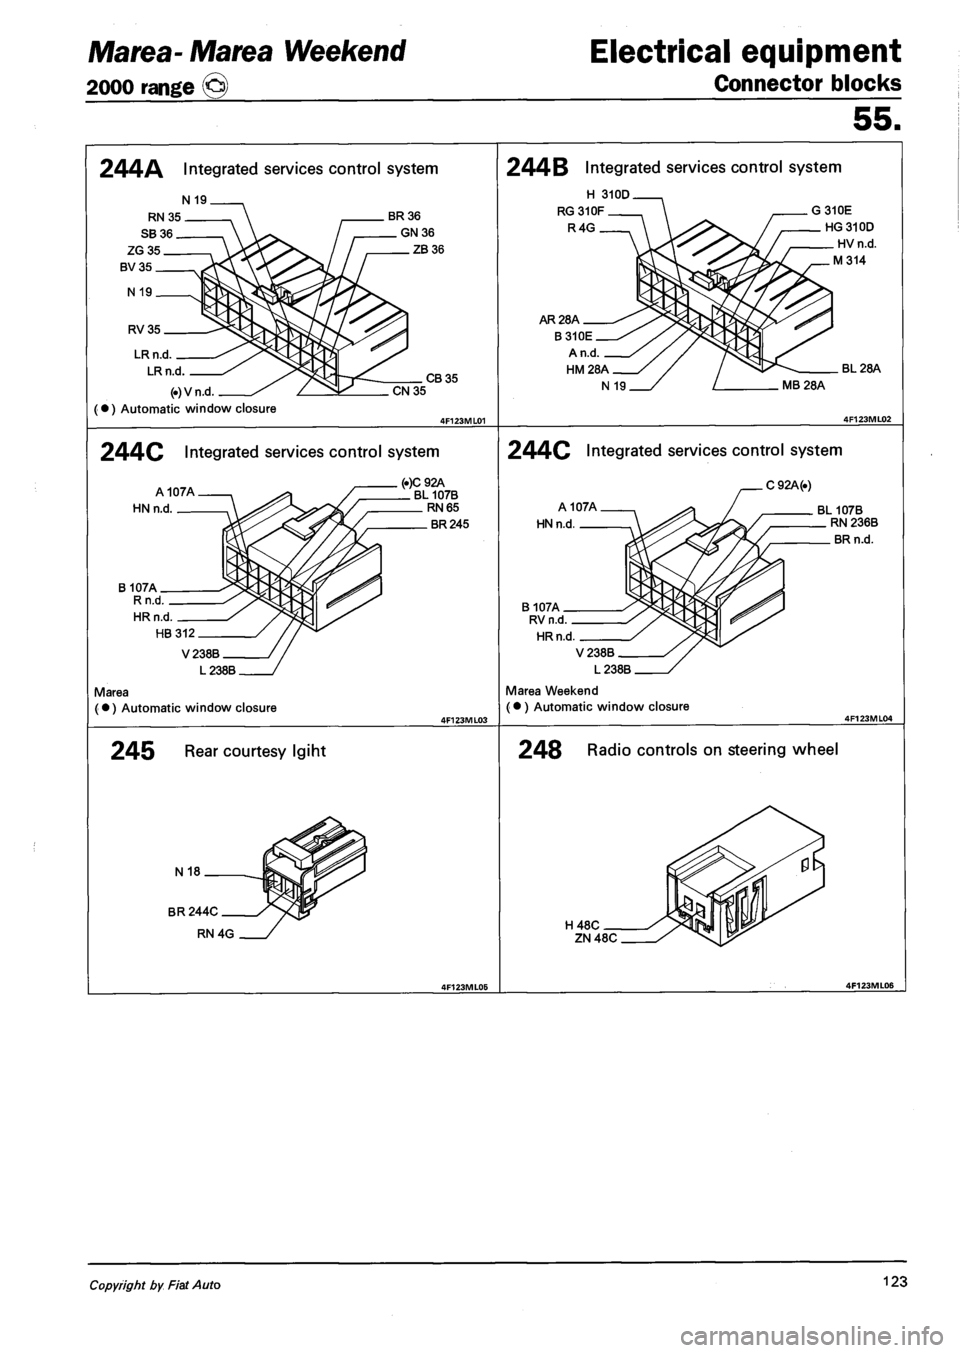 FIAT MAREA 2000 1.G User Guide Marea- Marea Weekend 
2000 range ® 
Electrical equipment 
Connector blocks 
55. 
244A Integrated services control system 
N 19 
RV35 
LR n.d. 
LR n.d. CB 35 (.)Vn.d 
(•) Automatic window closure 
C